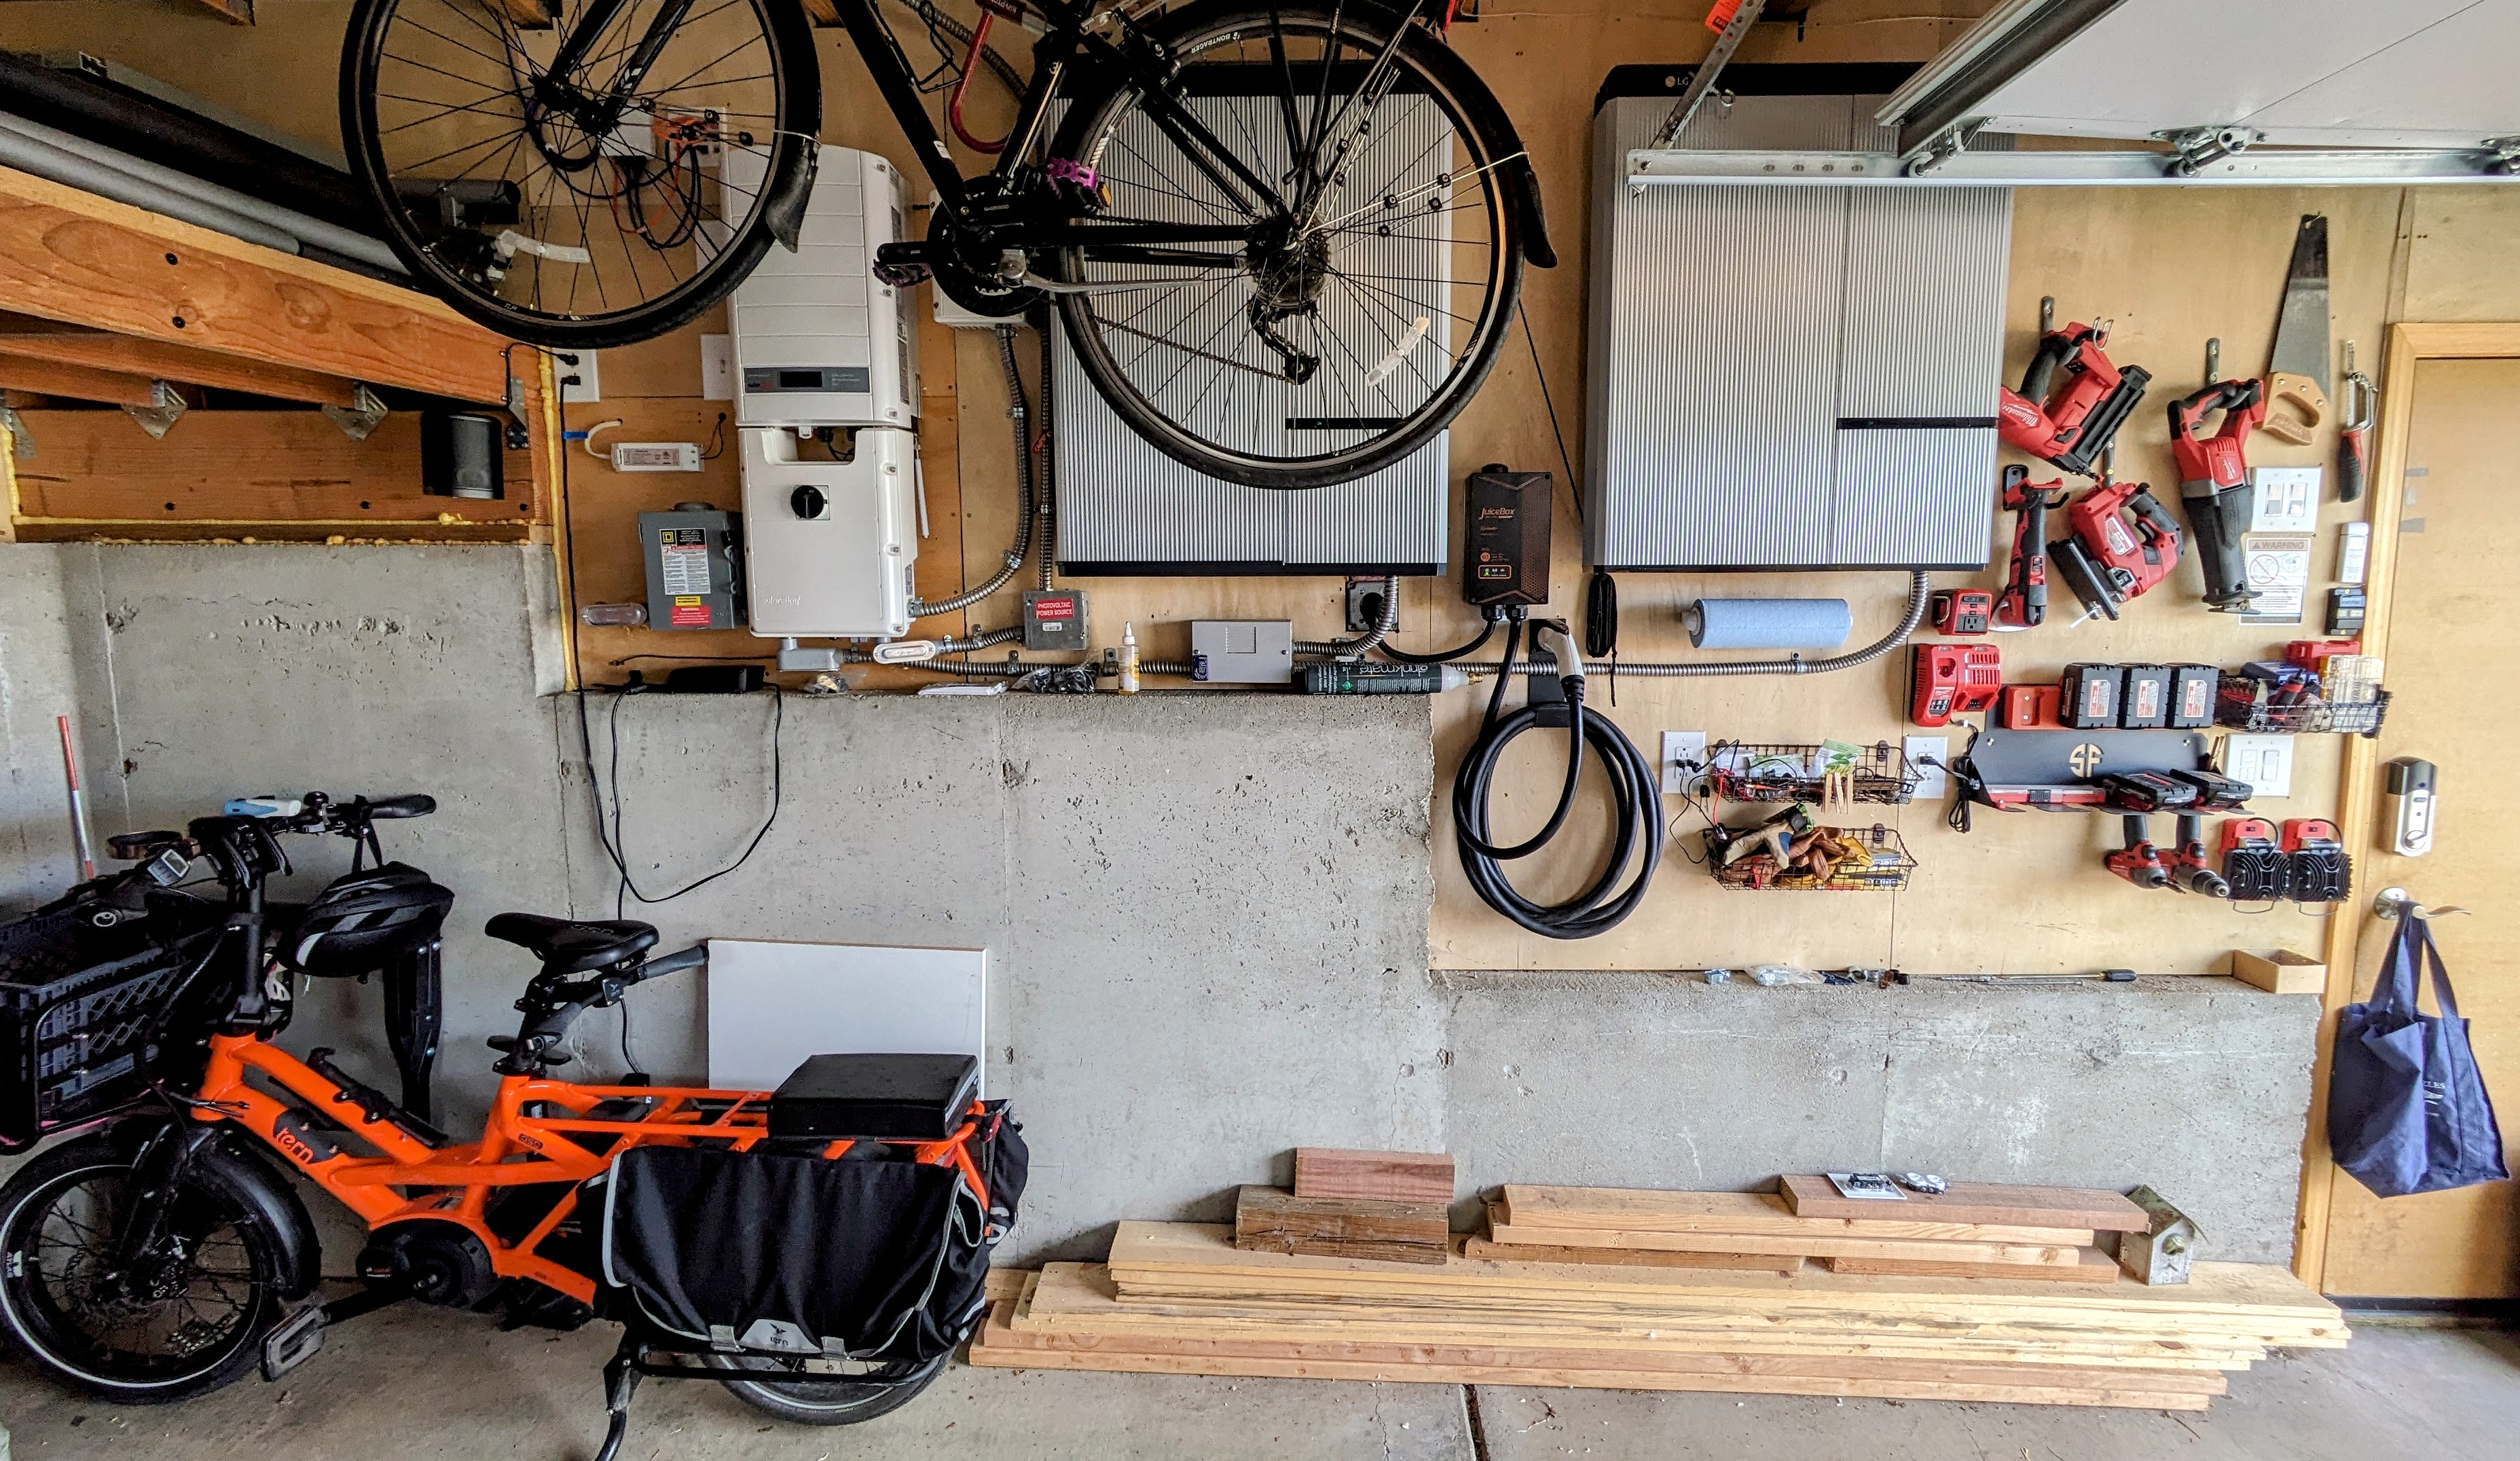 Our batteries and inverter mounted in our garage.